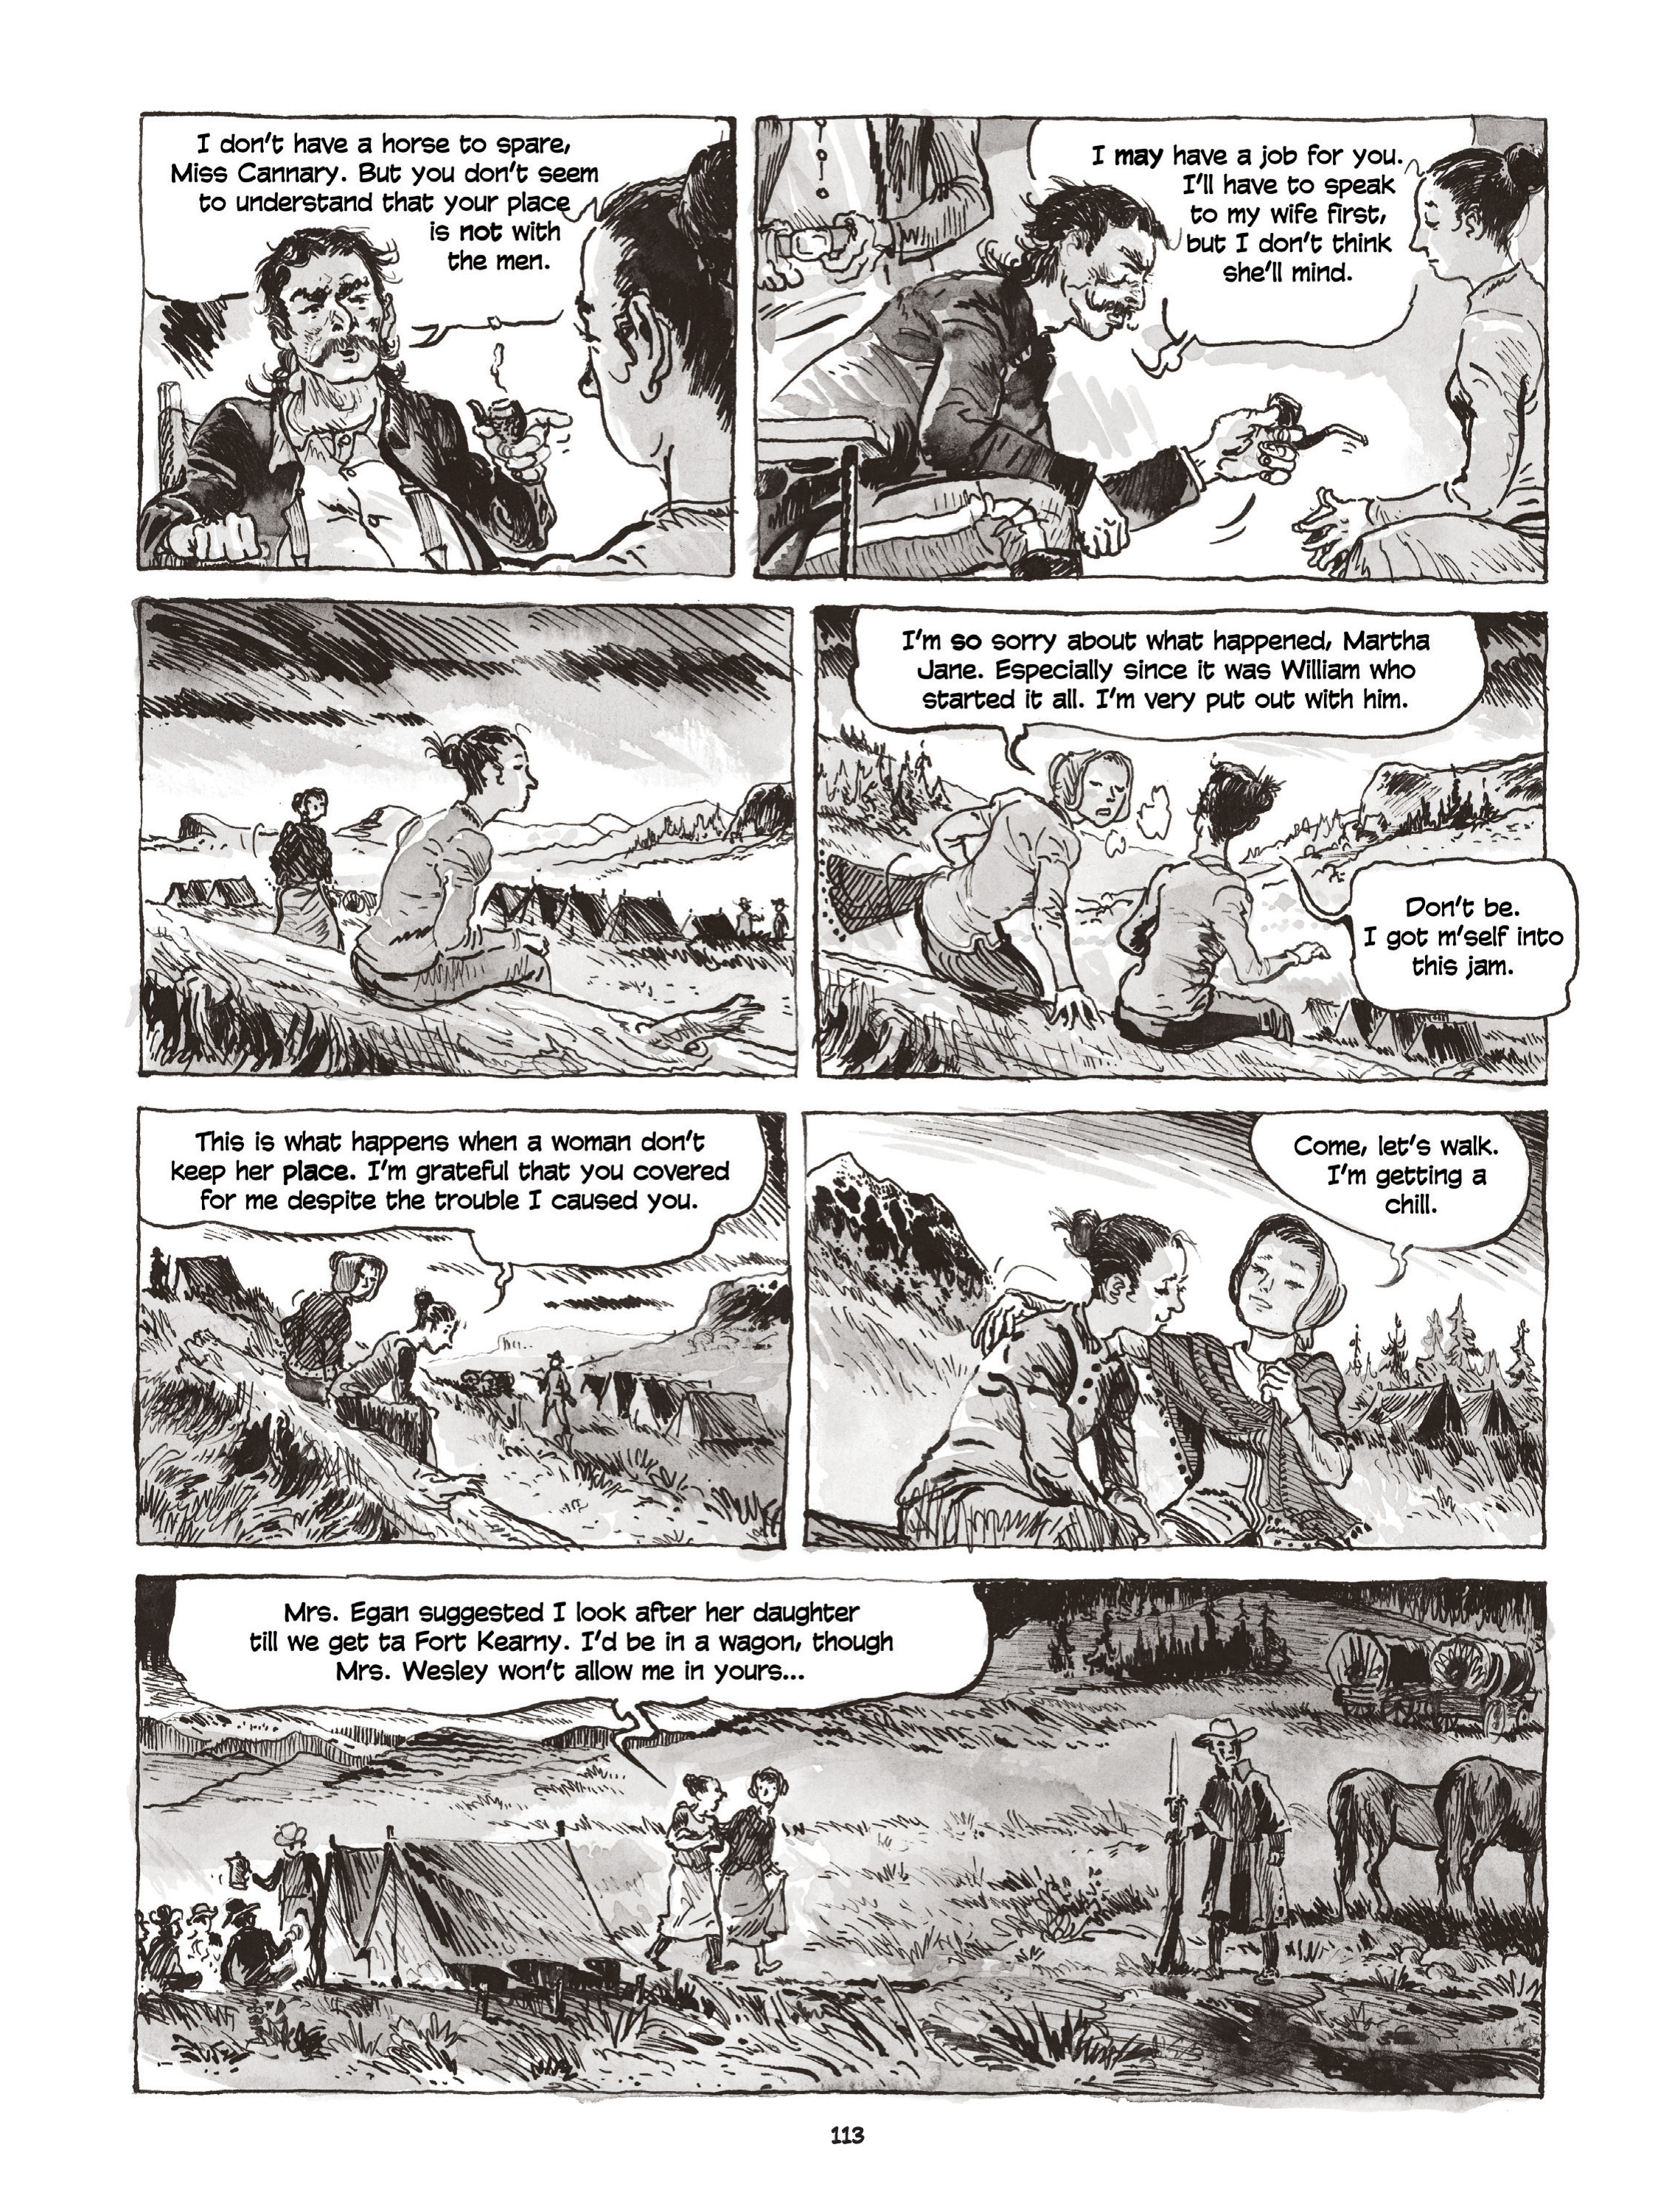 Read online Calamity Jane: The Calamitous Life of Martha Jane Cannary comic -  Issue # TPB (Part 2) - 14